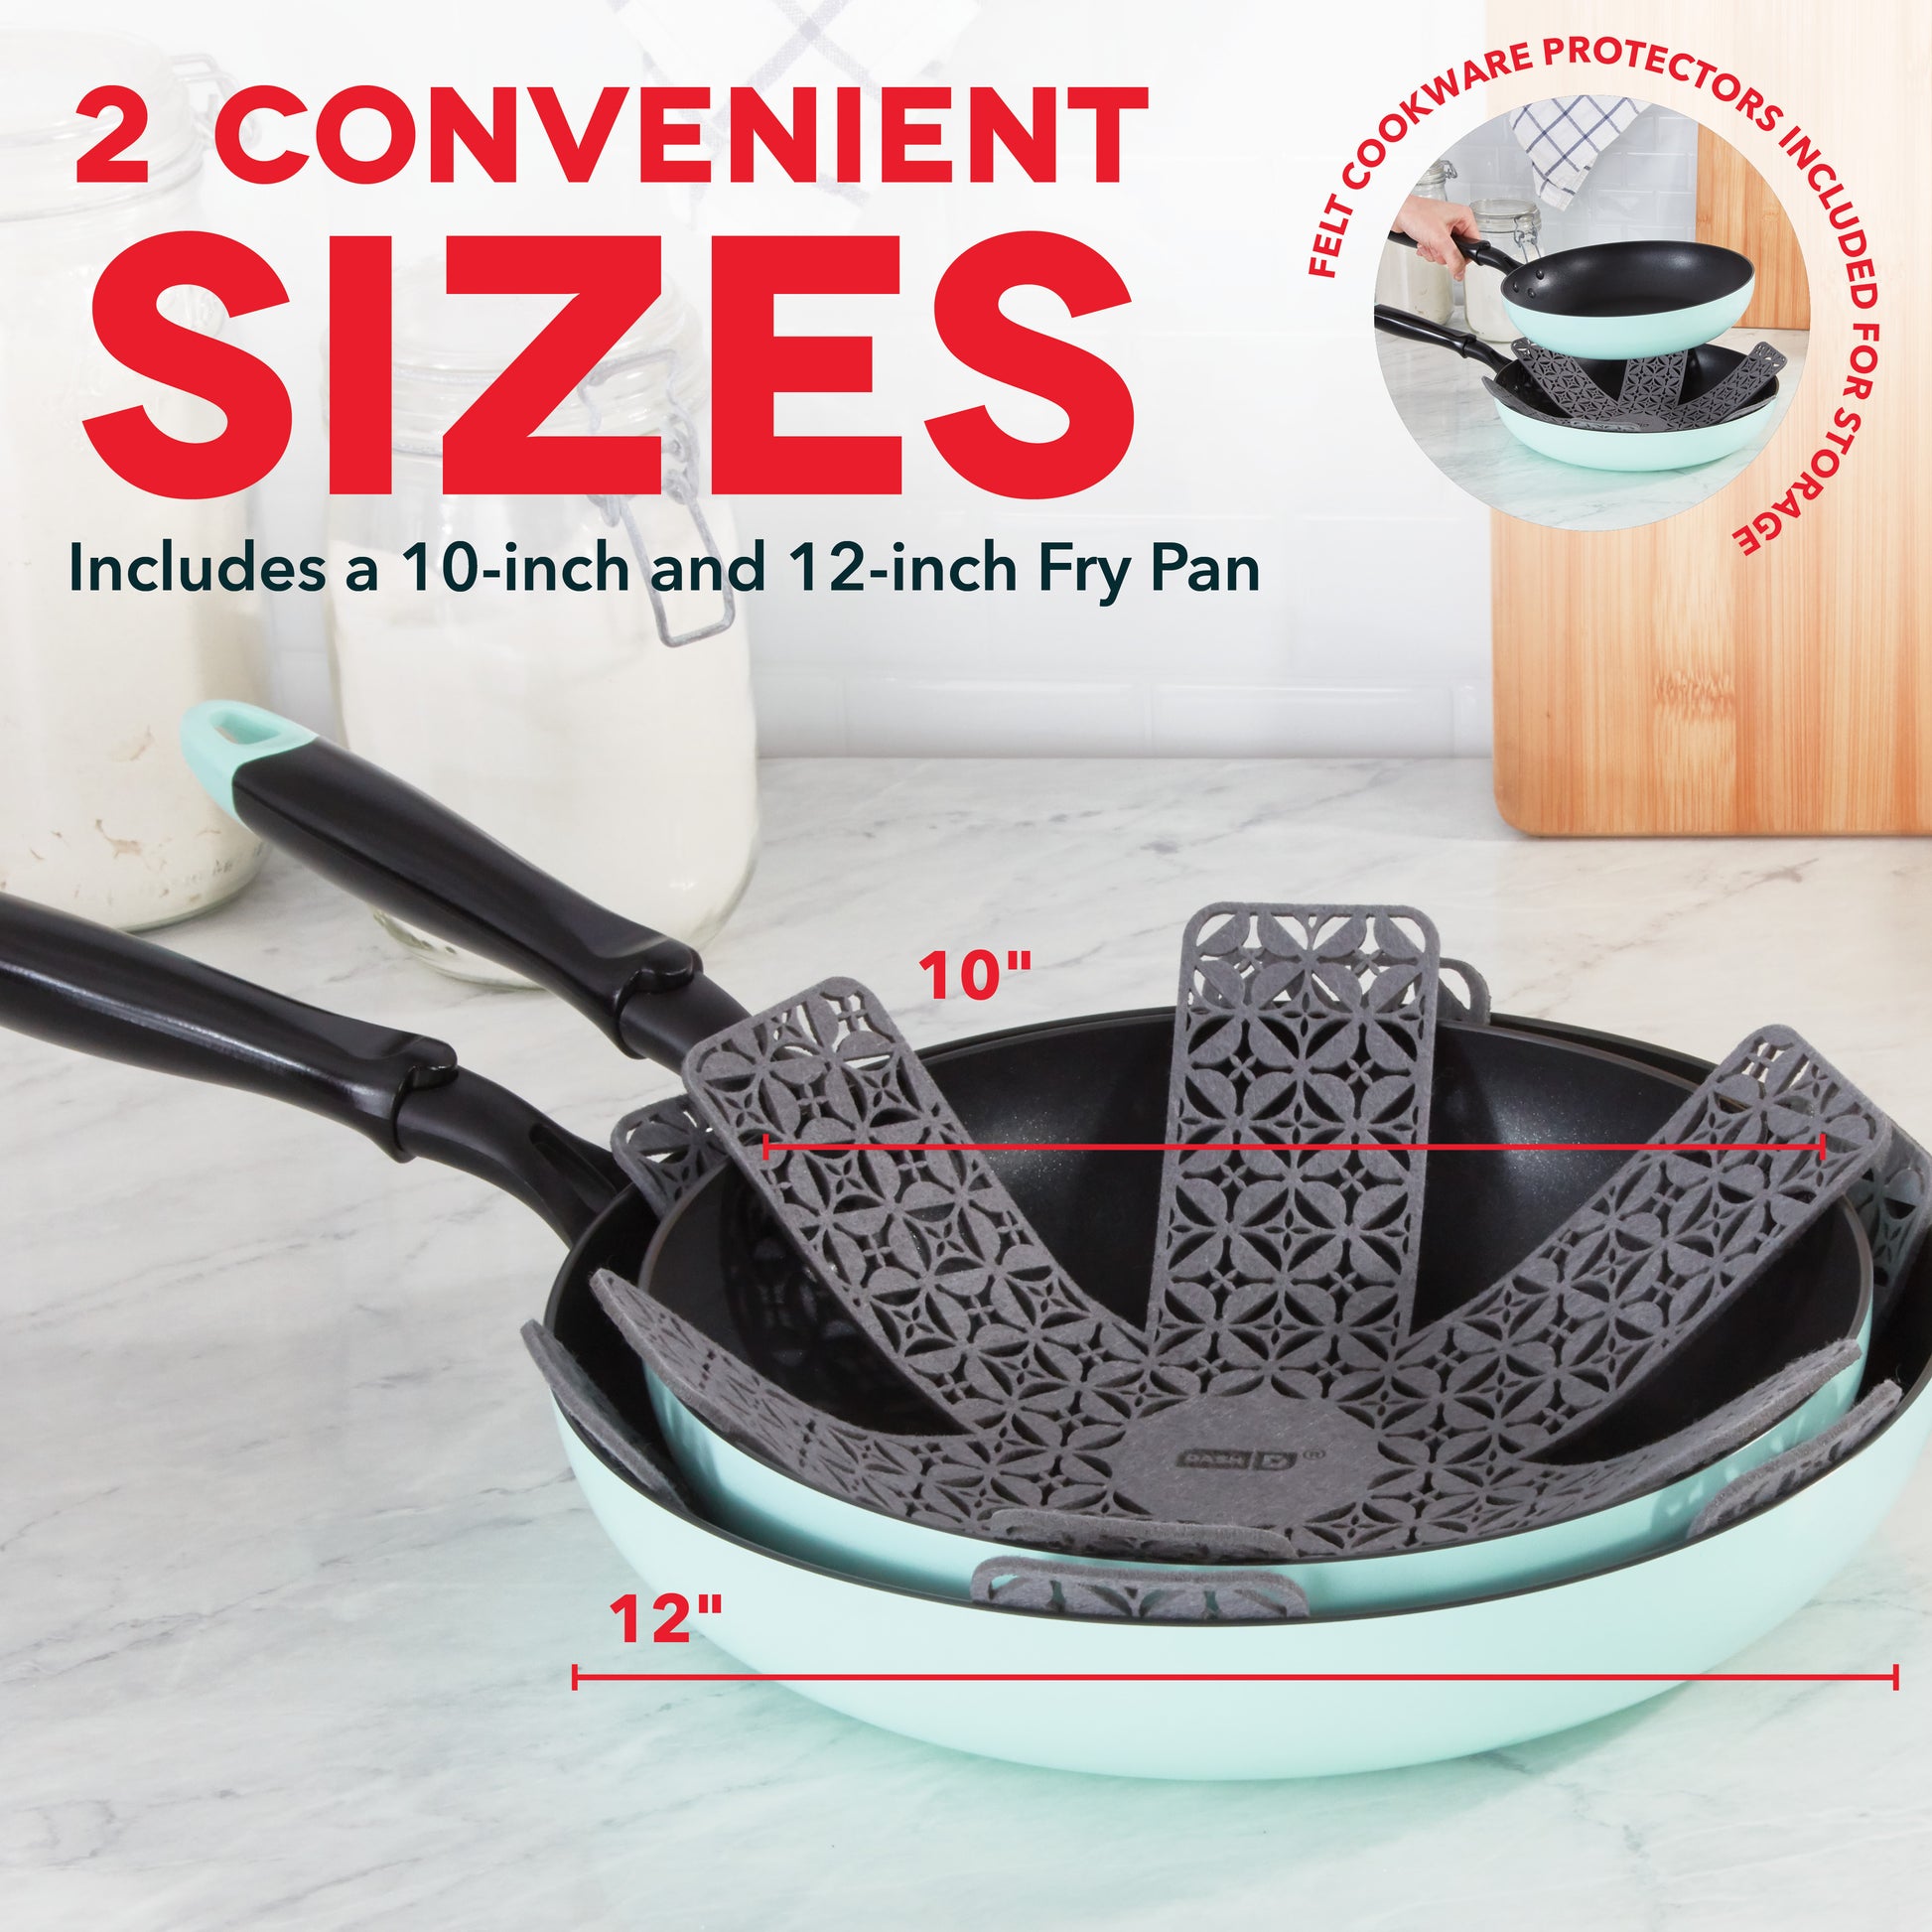 12-Inch Hard Anodized Nonstick Ultimate Pan with Lid